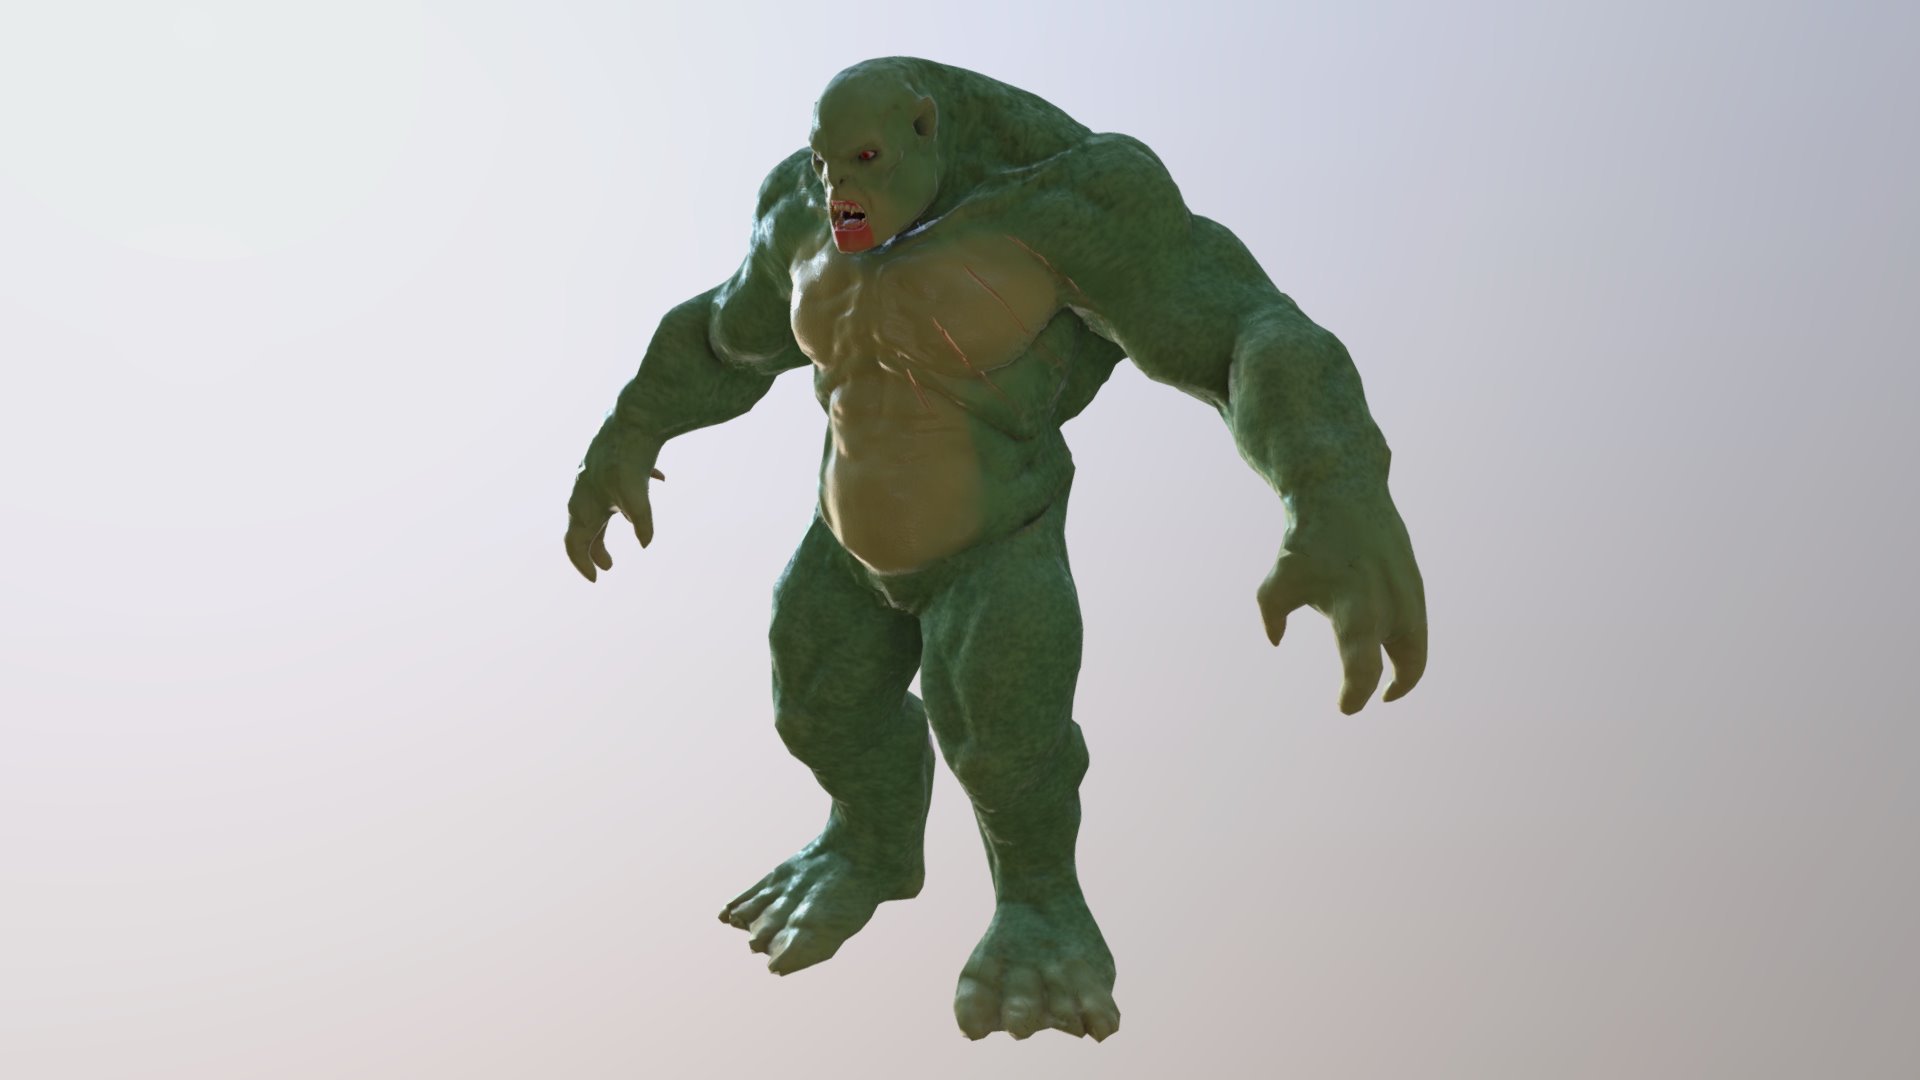 model of the ogre provided by durham college, Texturing done by author - Ogre - 3D model by Eric S (@spy_doctor) 3d model